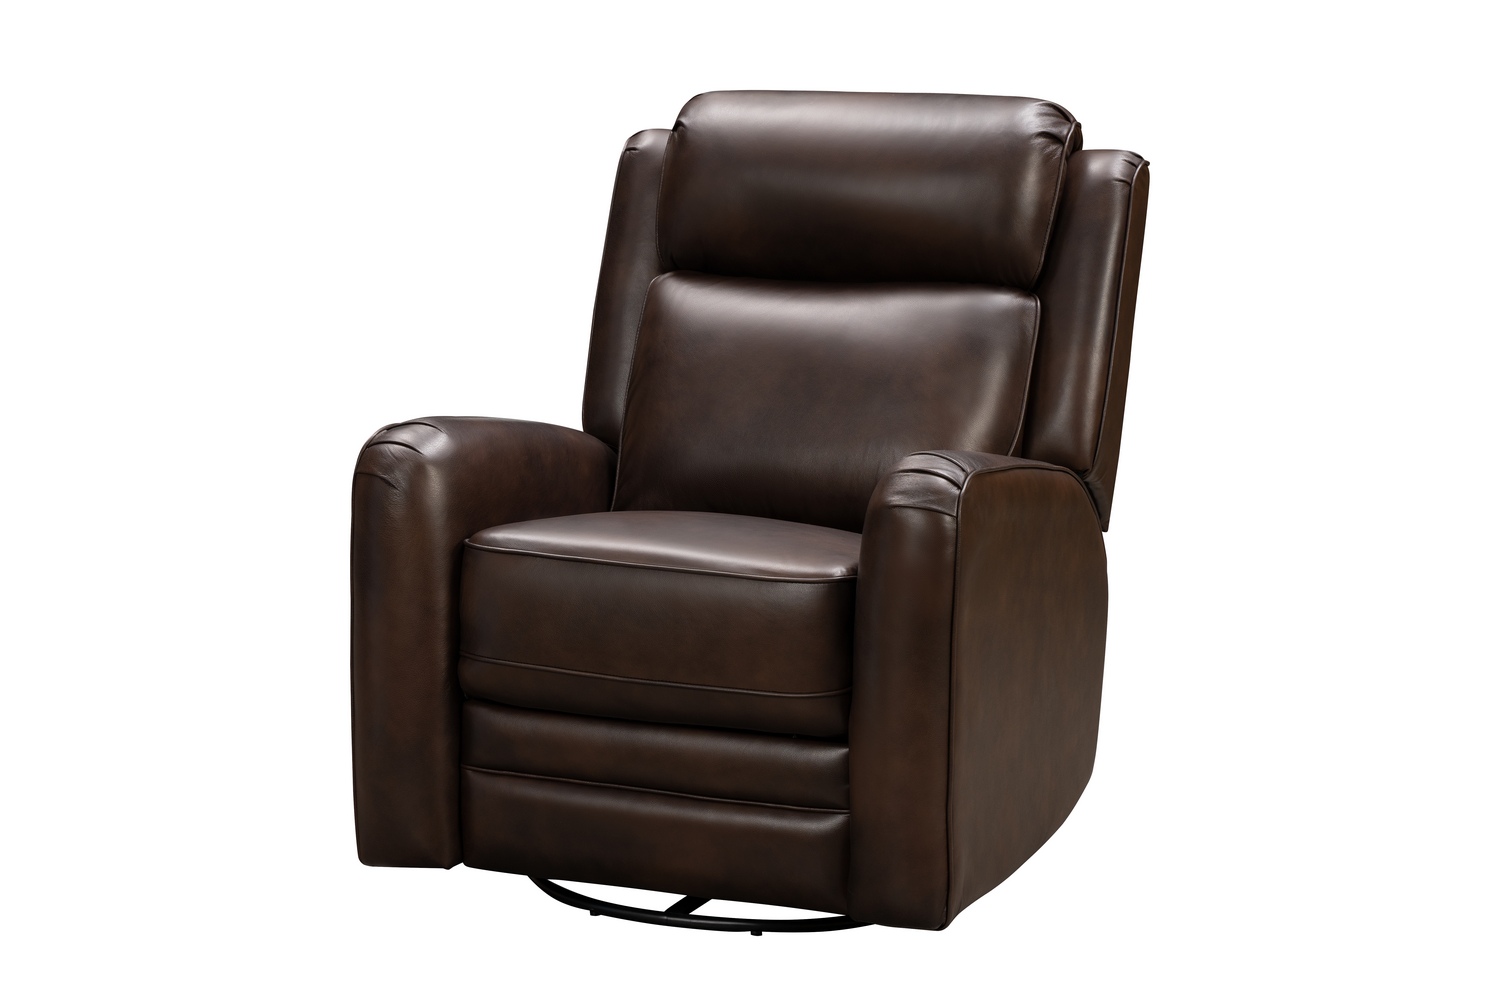 Barcalounger Kennedy Big and Tall Power Swivel Recliner Chair with Power Head Rest - Tonya Brown/Leather Match